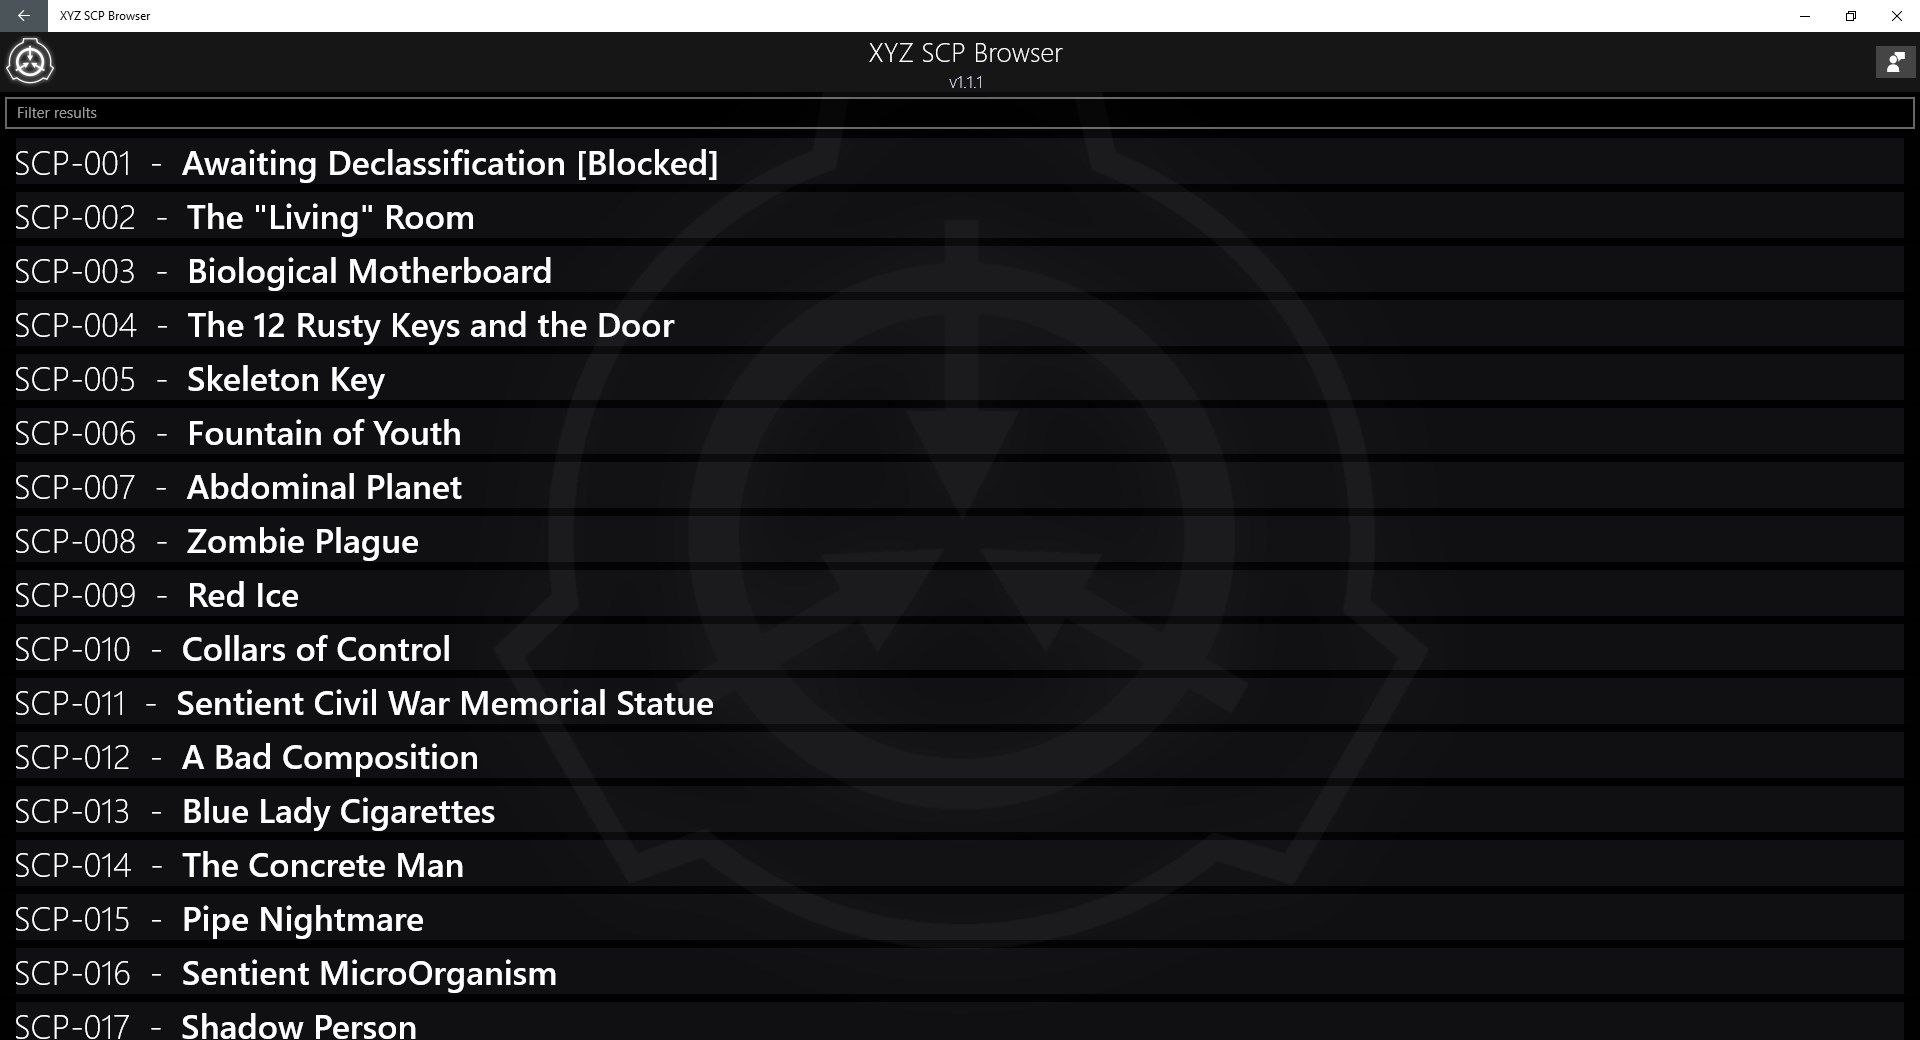 XYZ SCP Browser